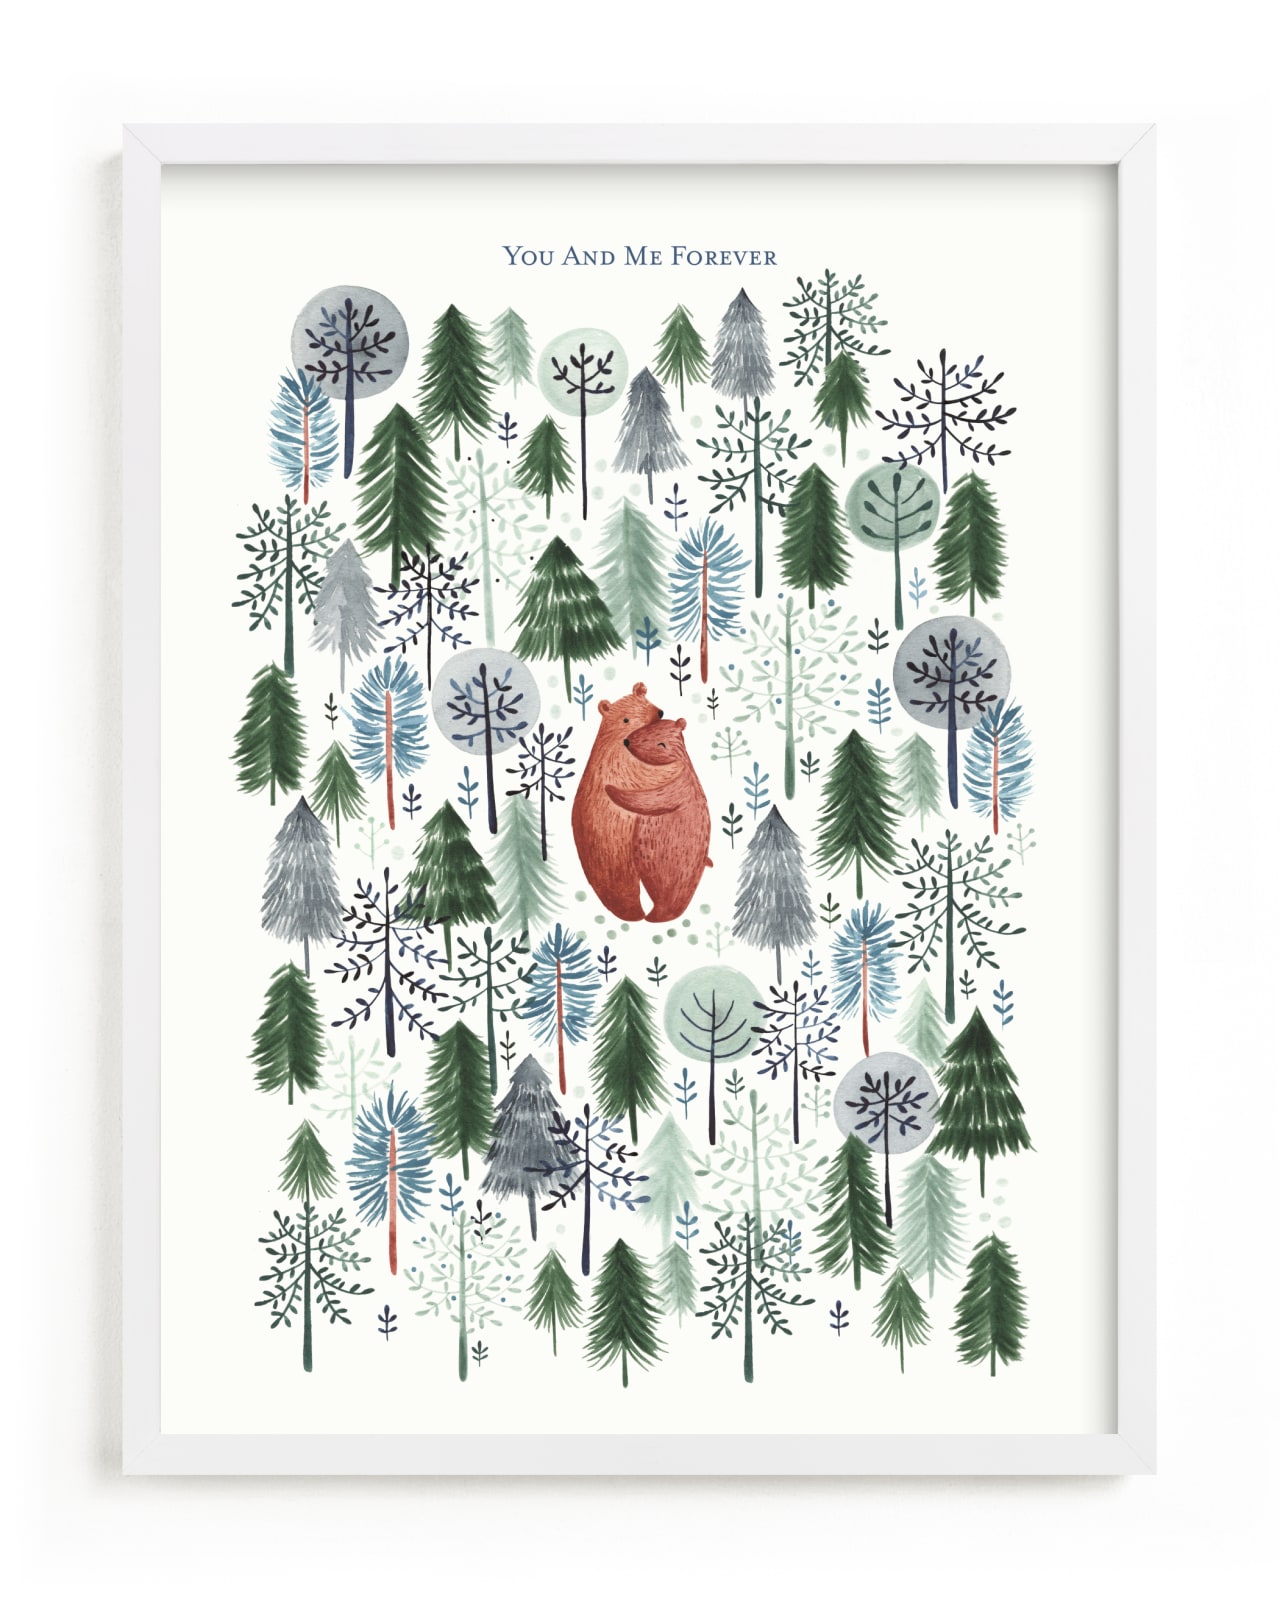 This is a grey nursery wall art by Sarah Knight called Never Alone.